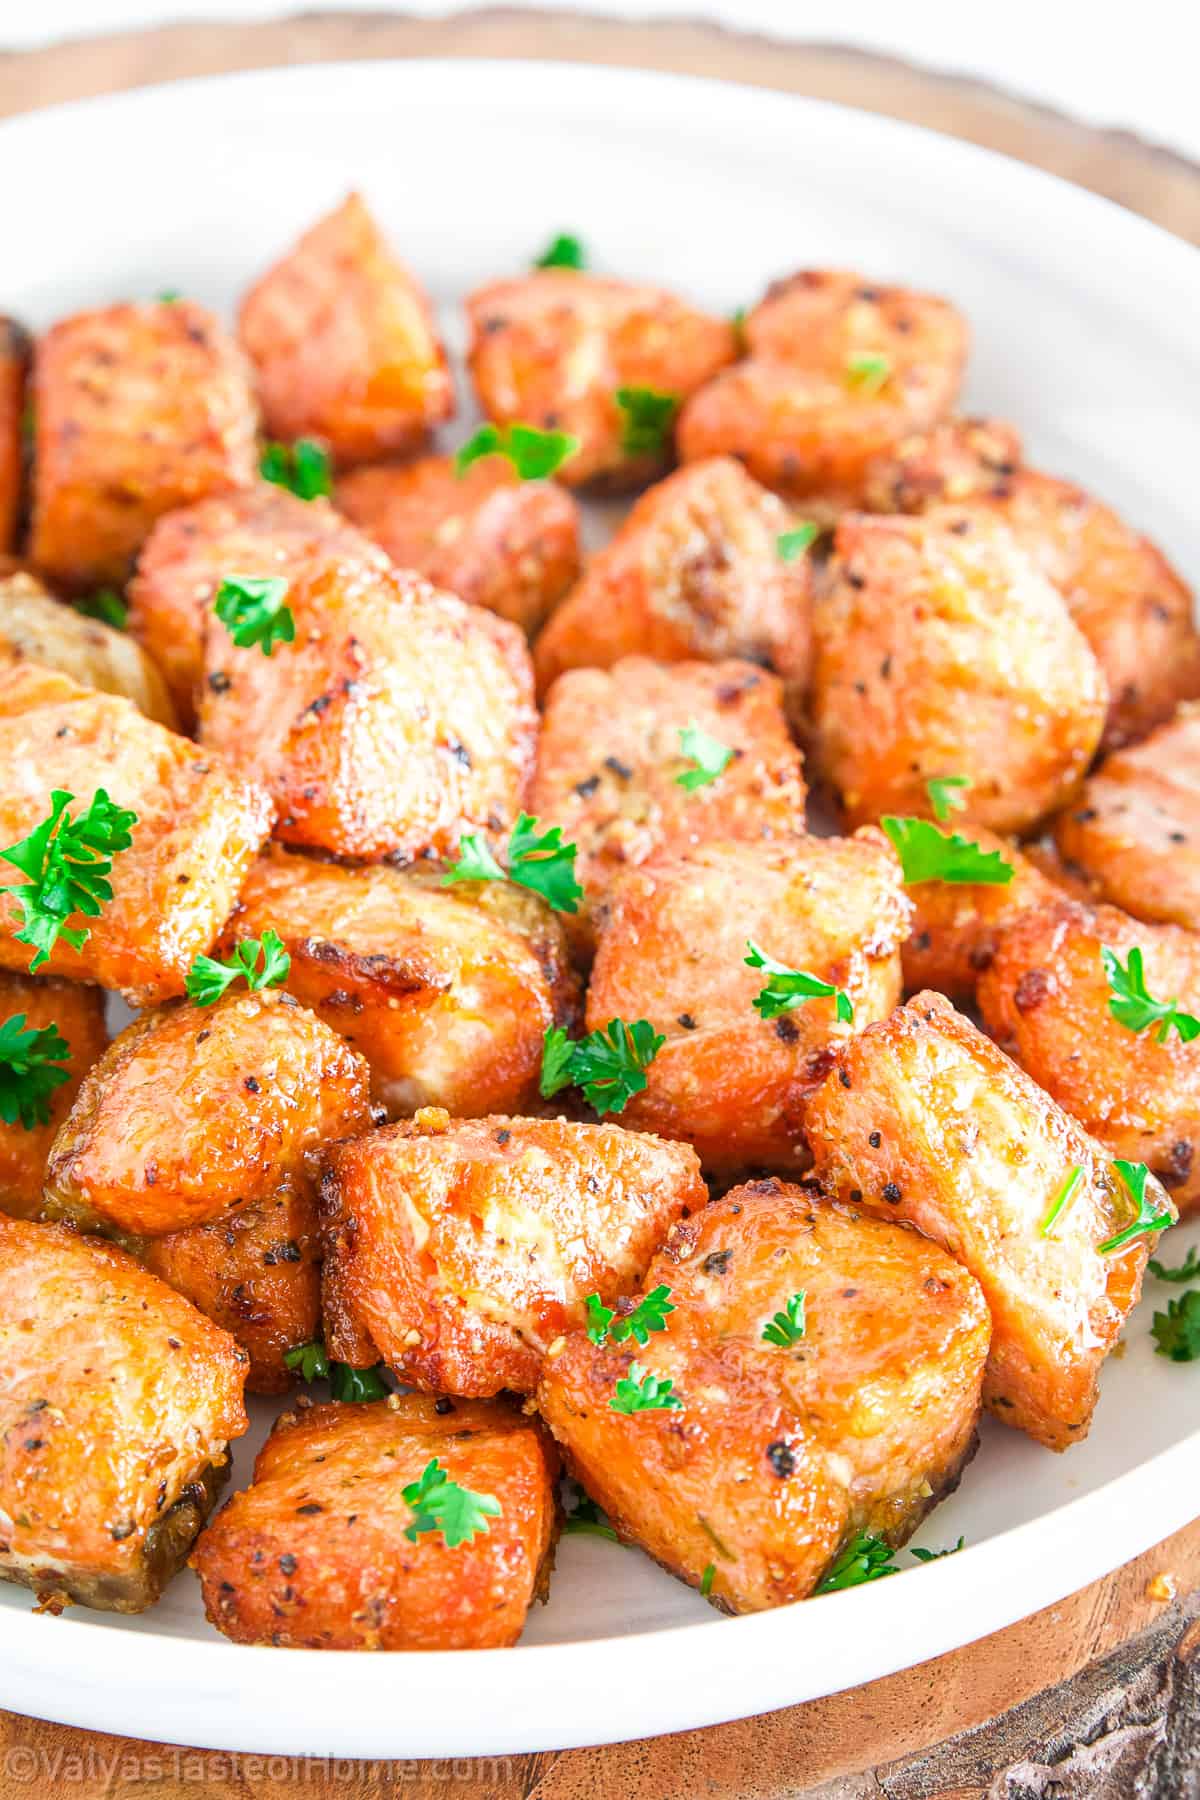 Coated in a flavorful pepper-garlic mix, these bites cook to perfection in under 10 minutes, making them a versatile addition to your weekly meal plan.